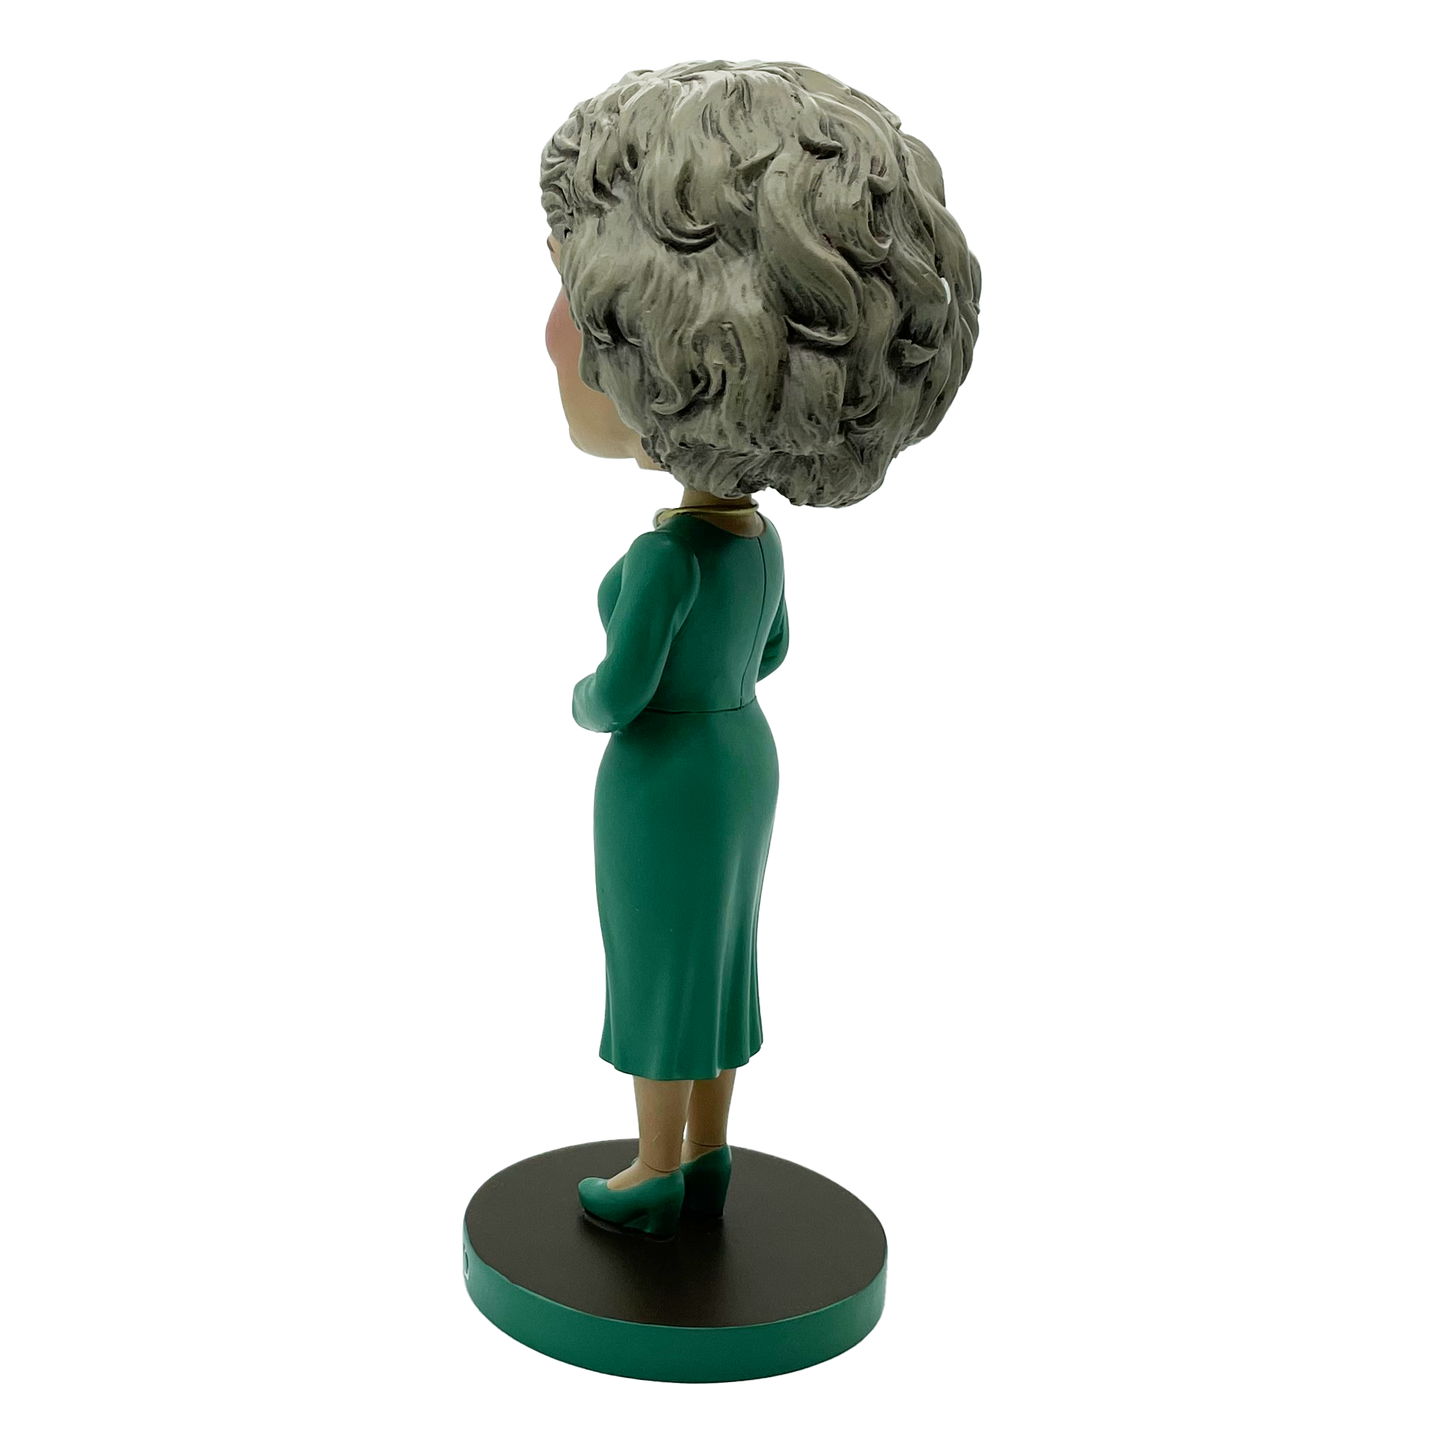 The Golden Girls Rose Nylund Green Dress Polystone Bobblehead (National Bobblehead Hall of Fame Exclusive) - Available 3rd Quarter 2022 - Icon Heroes 